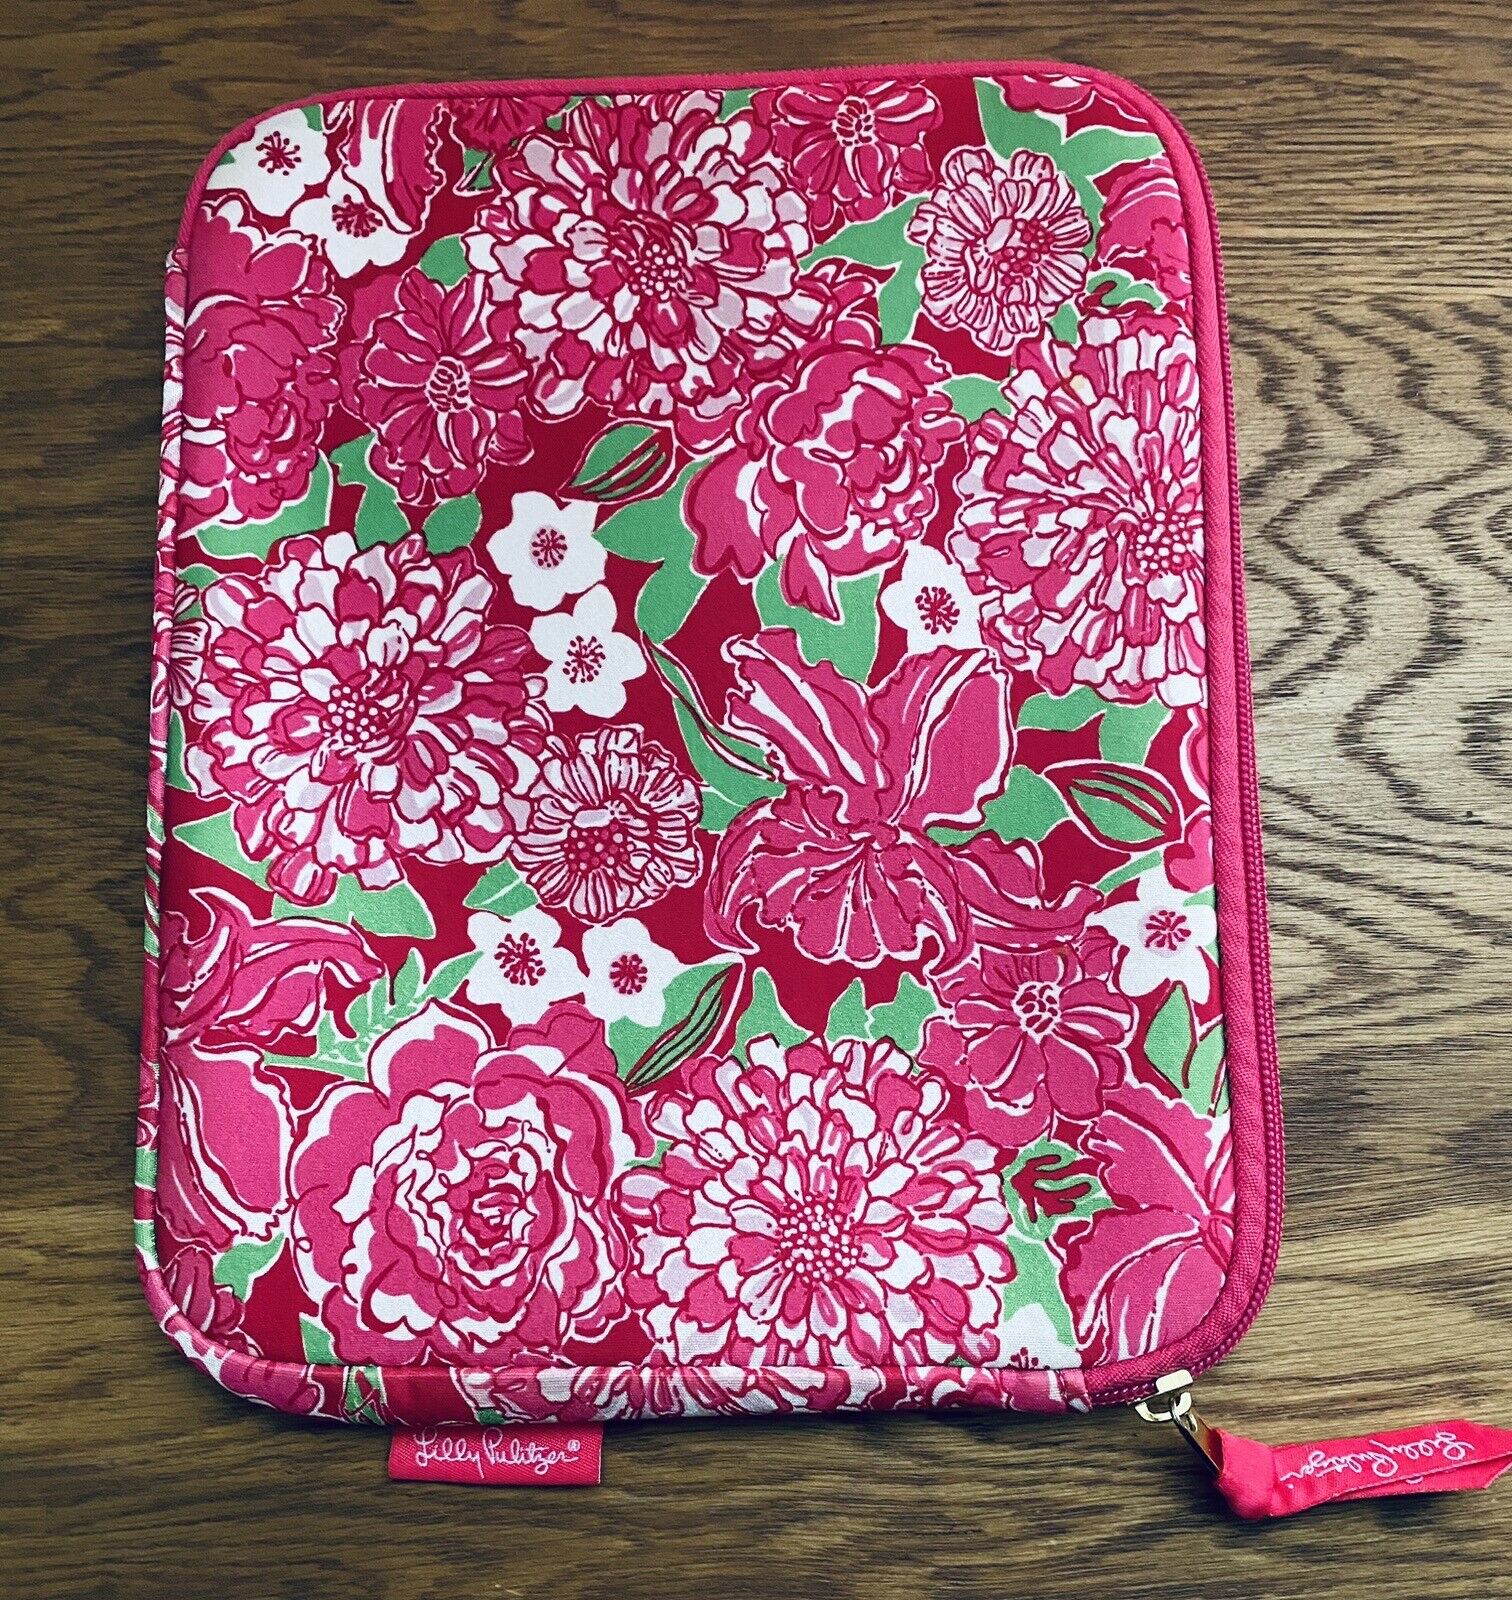 Lilly Pulitzer HOT PINK Neoprene Case 8” X 10” For iPad Mini Or Any Small Tablet